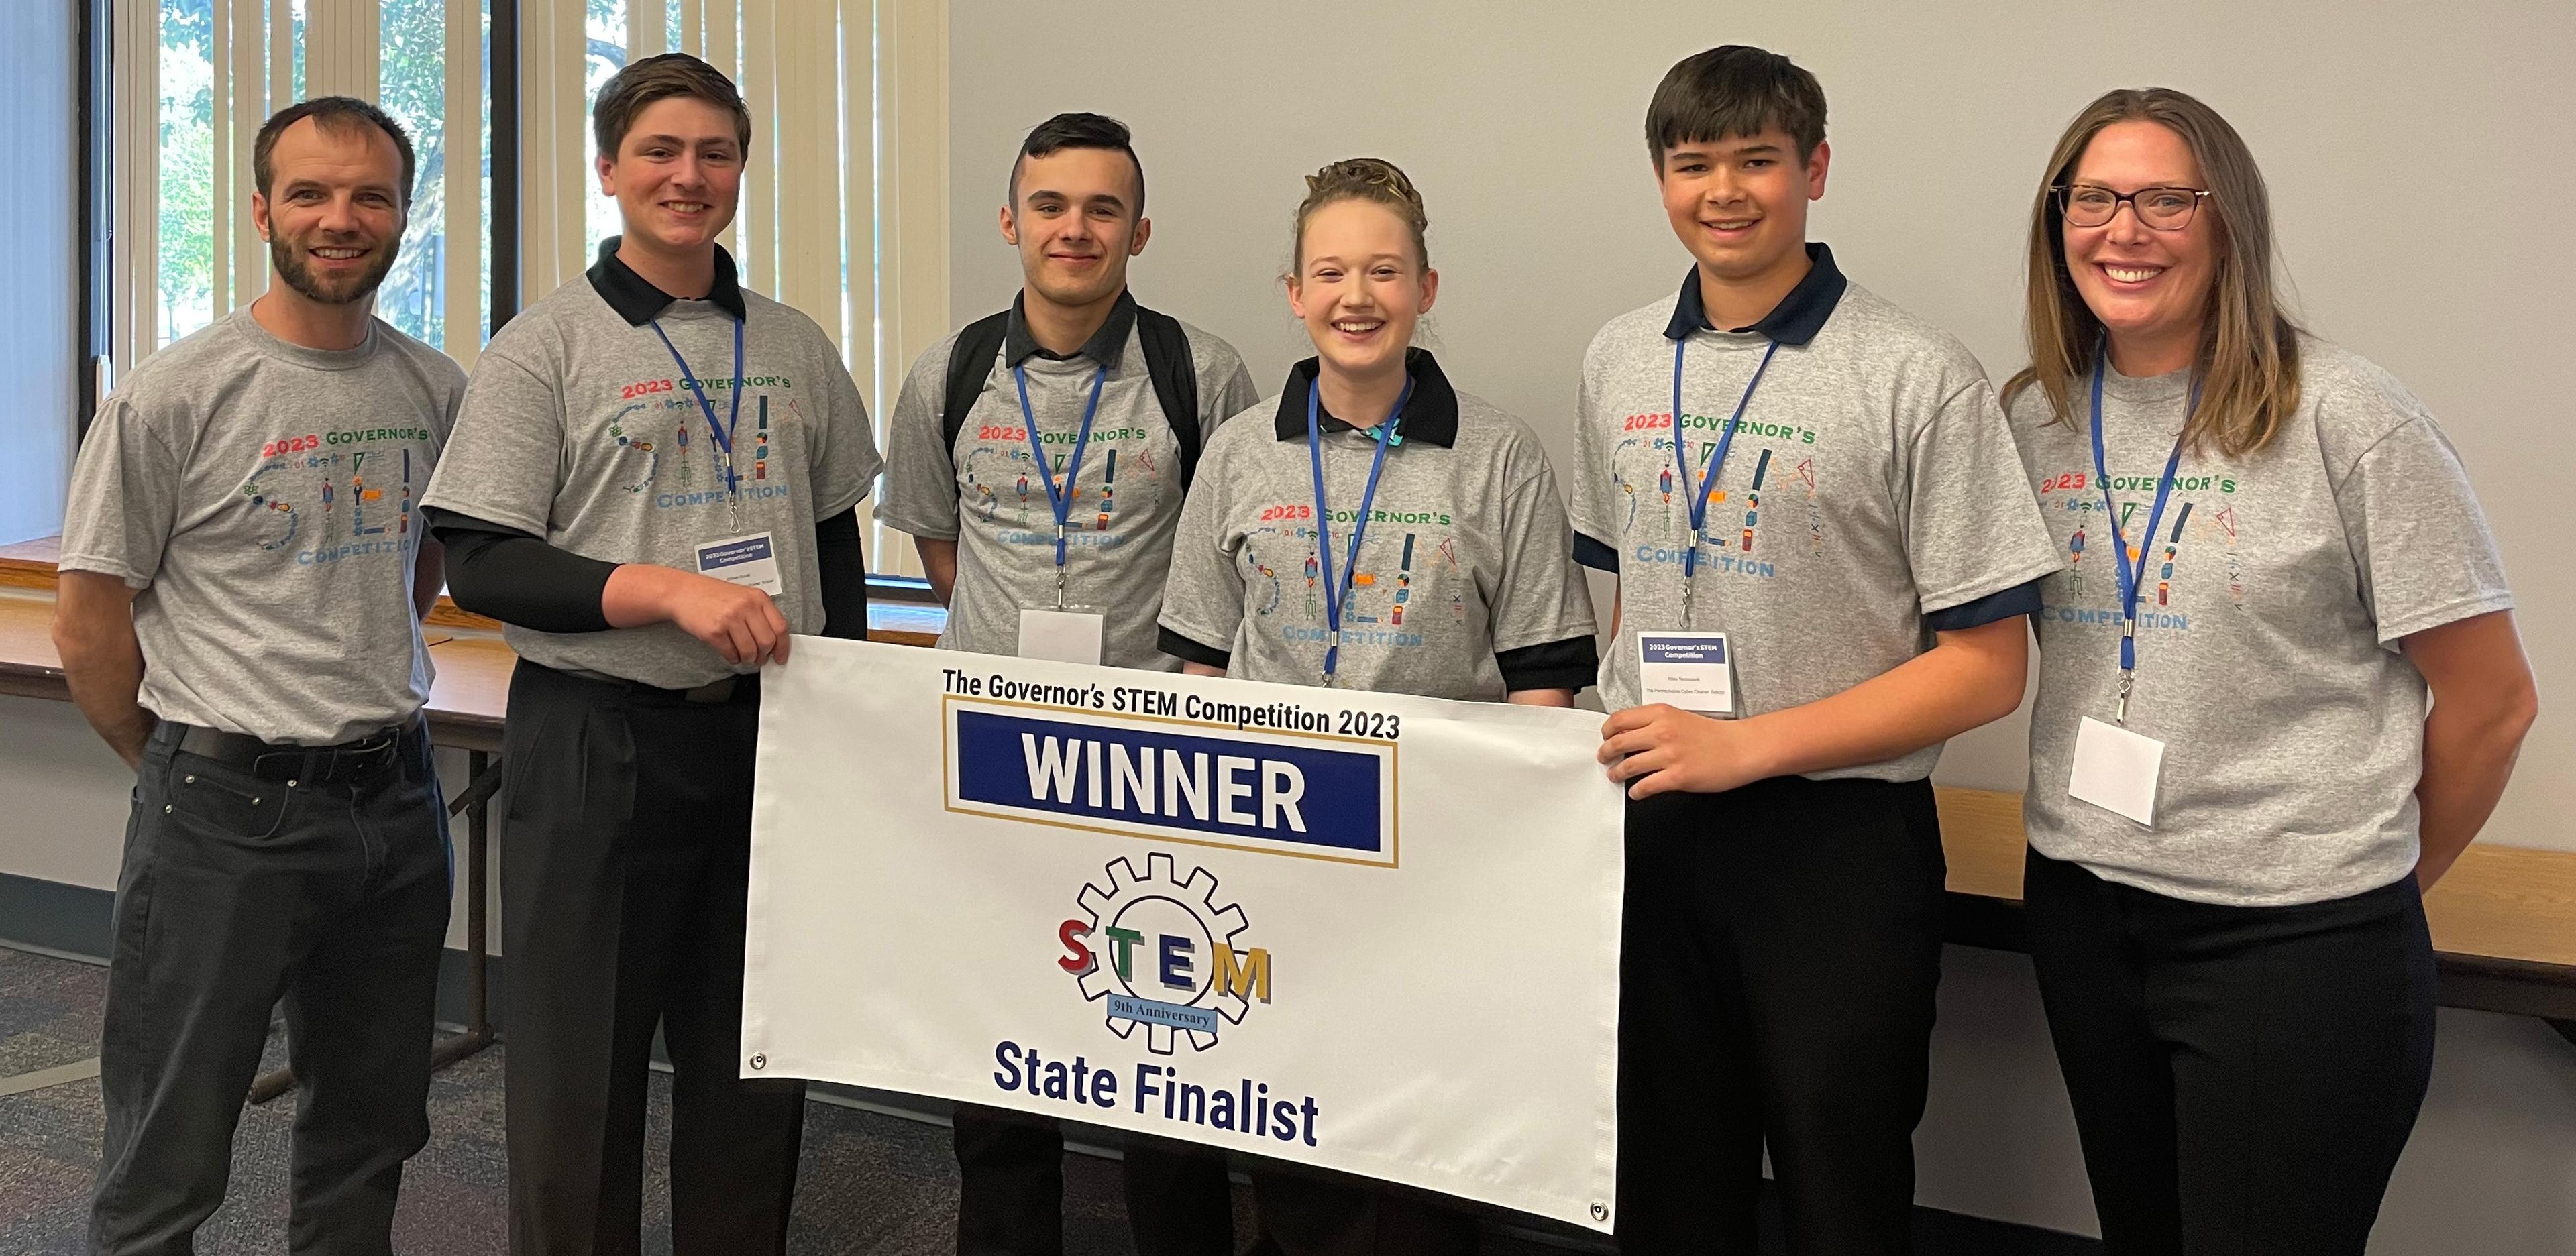 The winning PA Cyber team poses together around a sign that says "Winner."